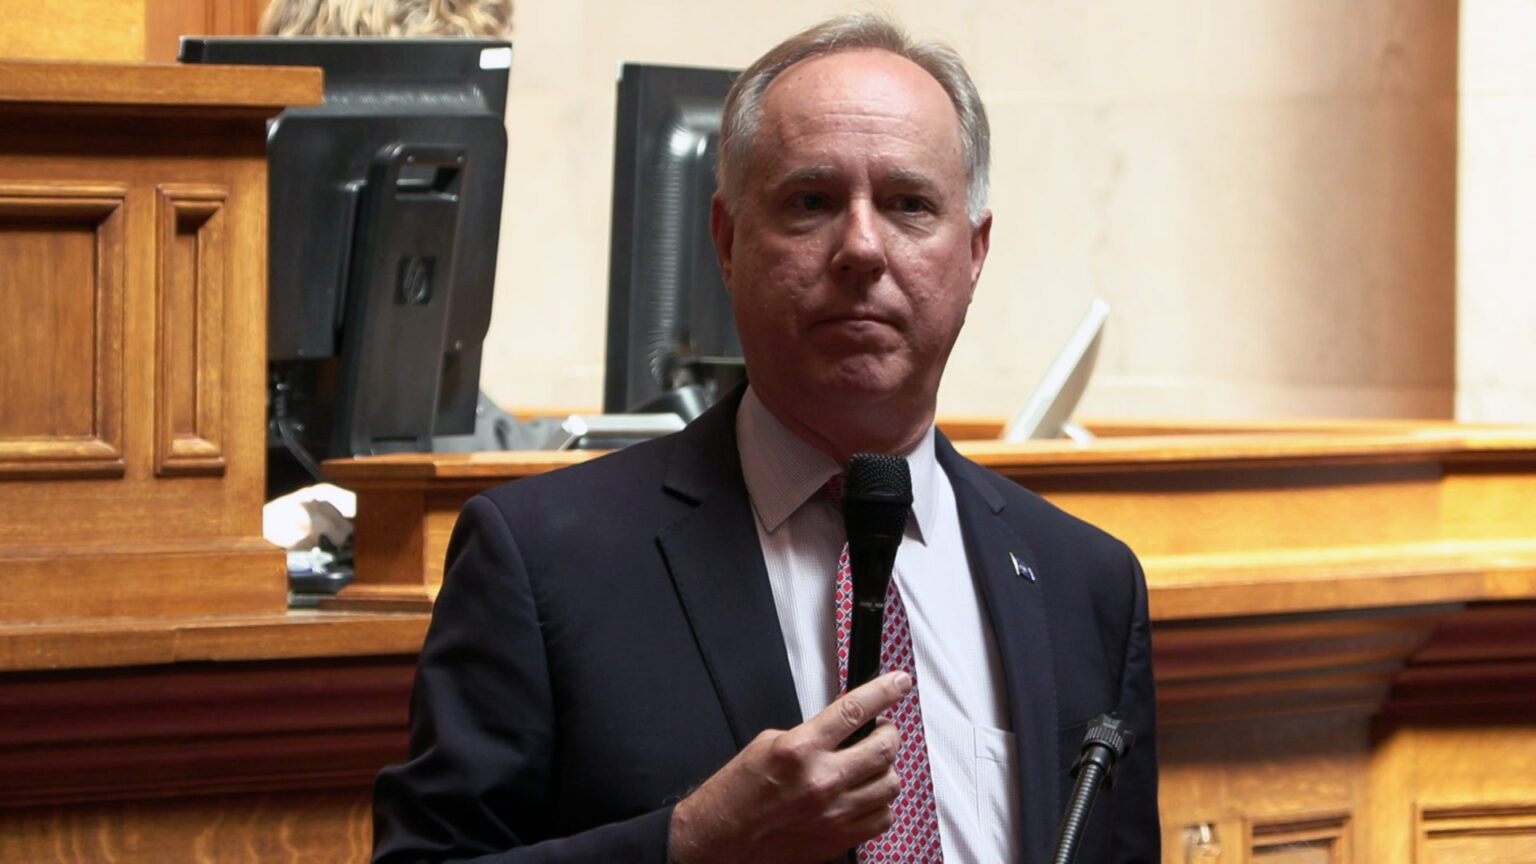 Robin Vos speaks into a microphone while standing in front of a wood legislative dais, with the back of two computer monitors on its surface in the background.